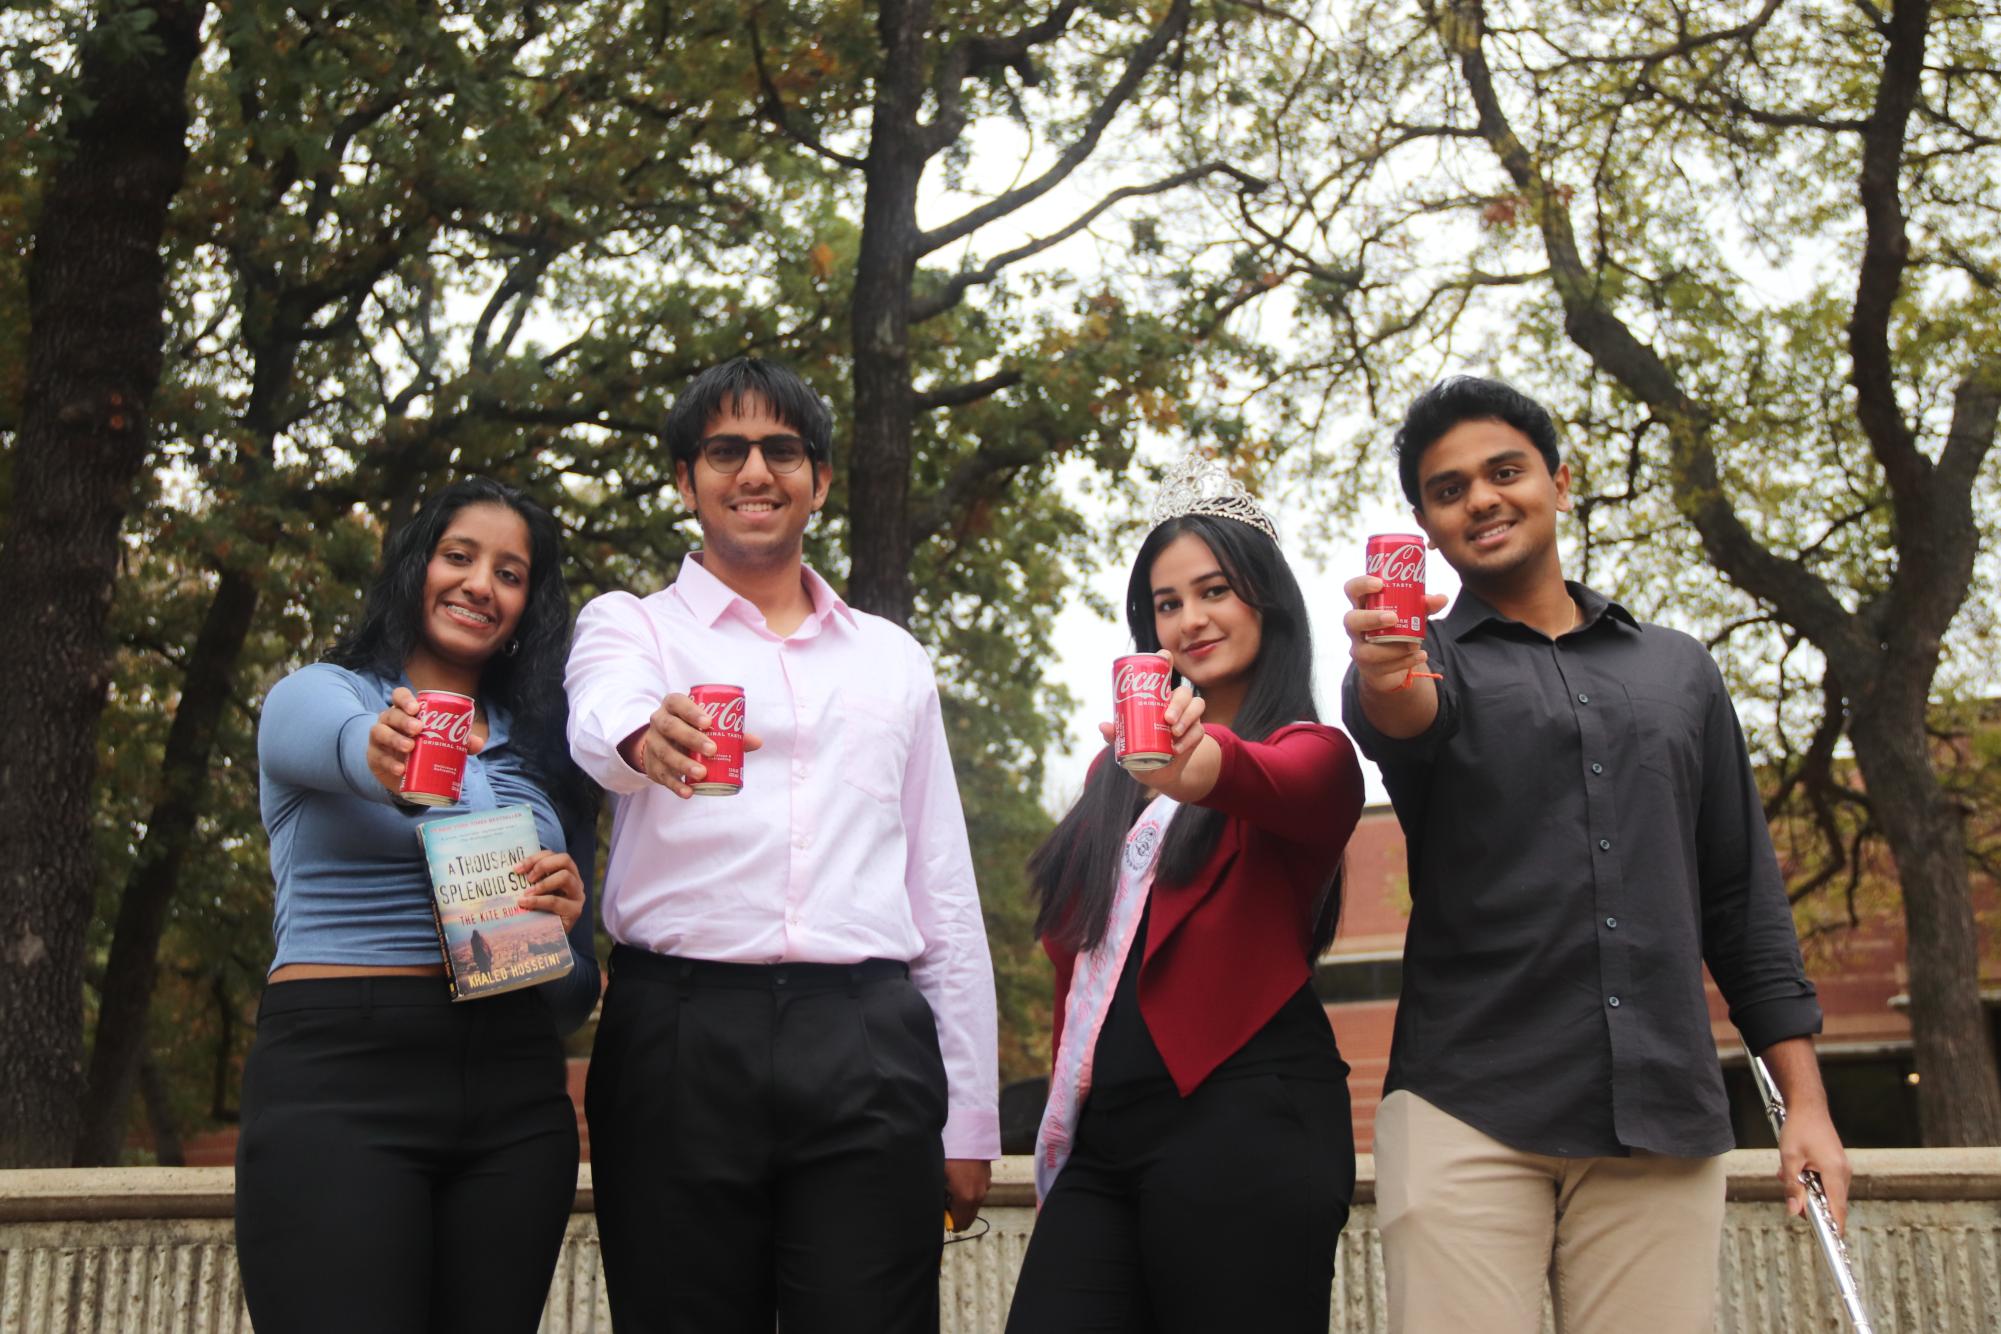 Coppell High School seniors Tisya Yadav, Aryan Bansal, Anusha Narway and Abhilash Katuru were named as four of the 1,514 semifinalists in the Coca-Cola Scholarship out of a pool of 103,800 students nationwide for their excellence and skills. On Jan. 11, Narway and Katuru were selected as two of the 250 advancing regional finalists. 150 Coca-Cola scholars receive a $20,000 scholarship for any school-related expenses.